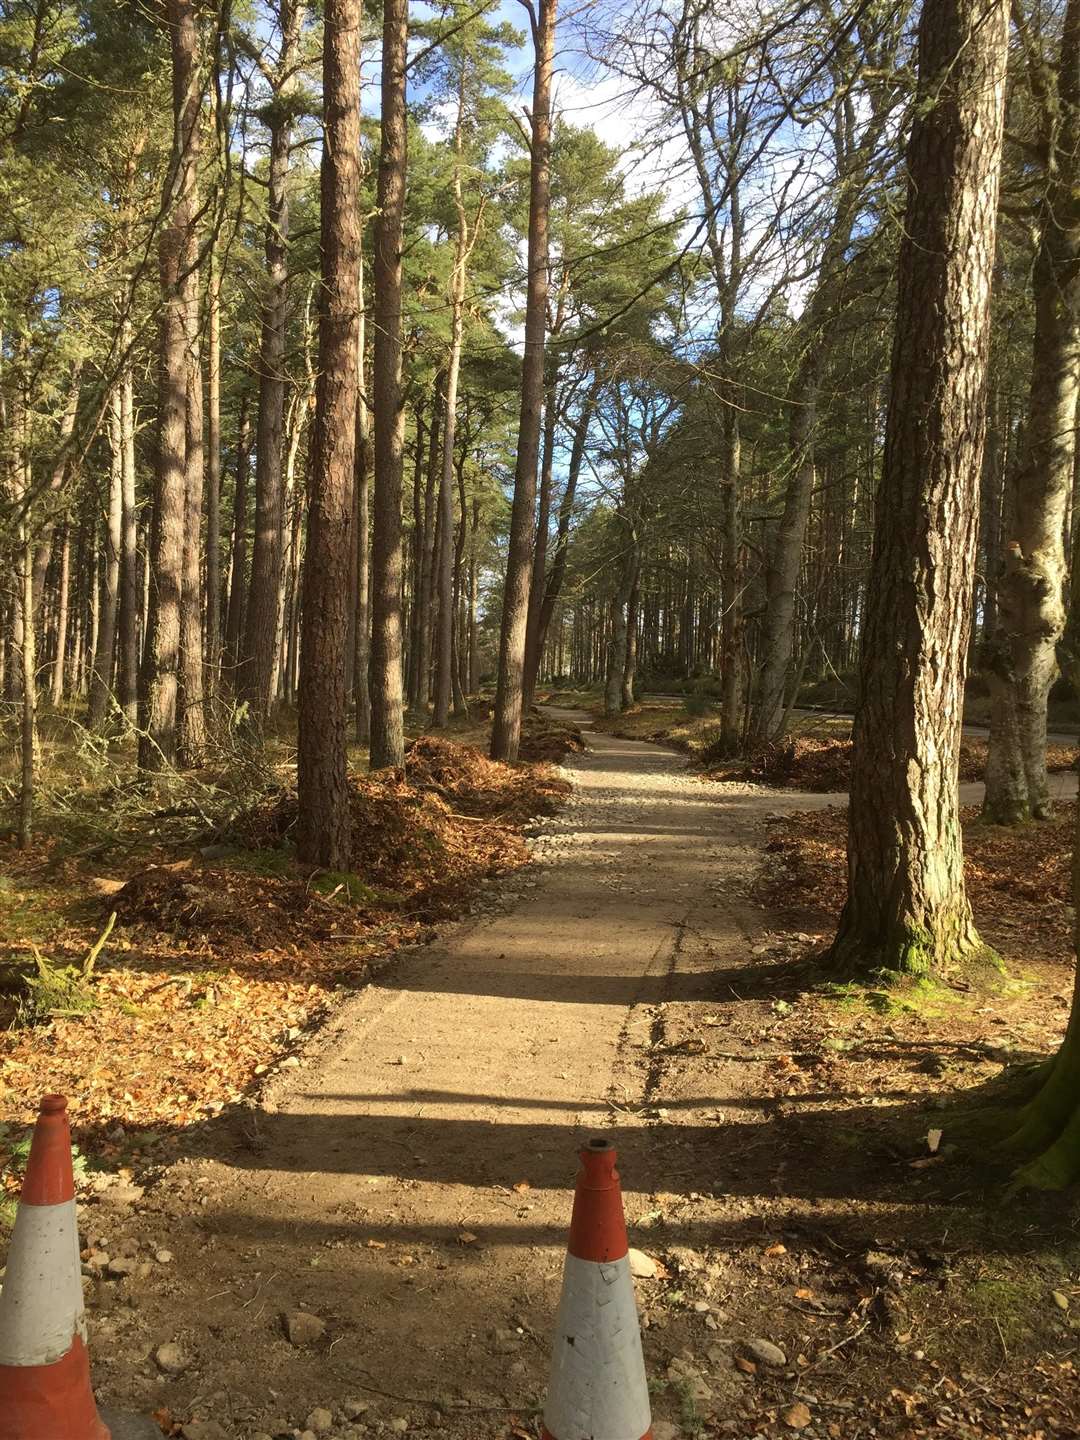 The aim of the project is to allow walkers and cyclists and also users of mobility scooters to travel safely from Golspie village out to and into the woods.”